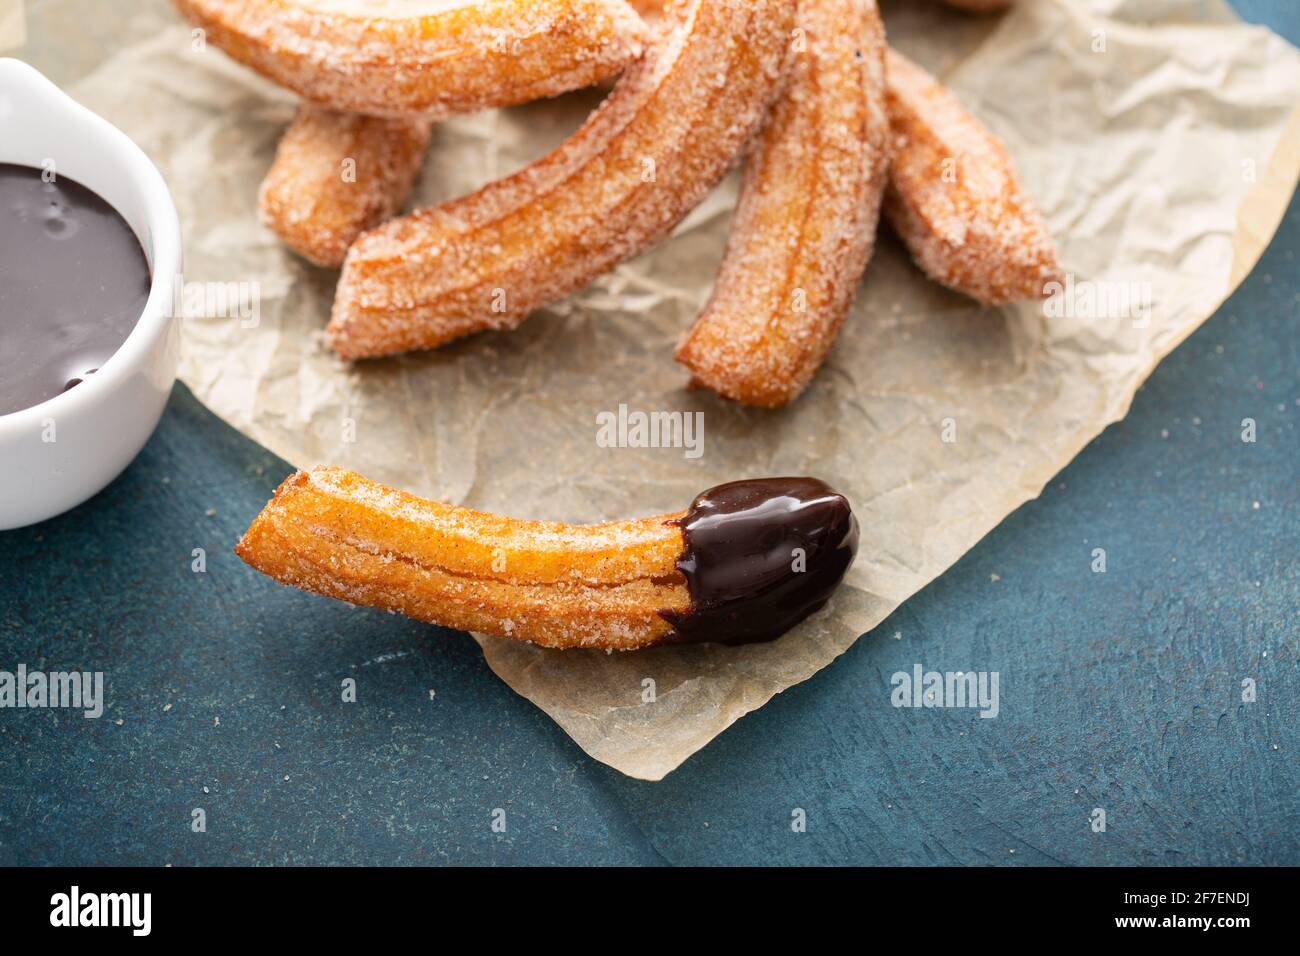 Homemade churros with cinnamon sugar on parchment Stock Photo